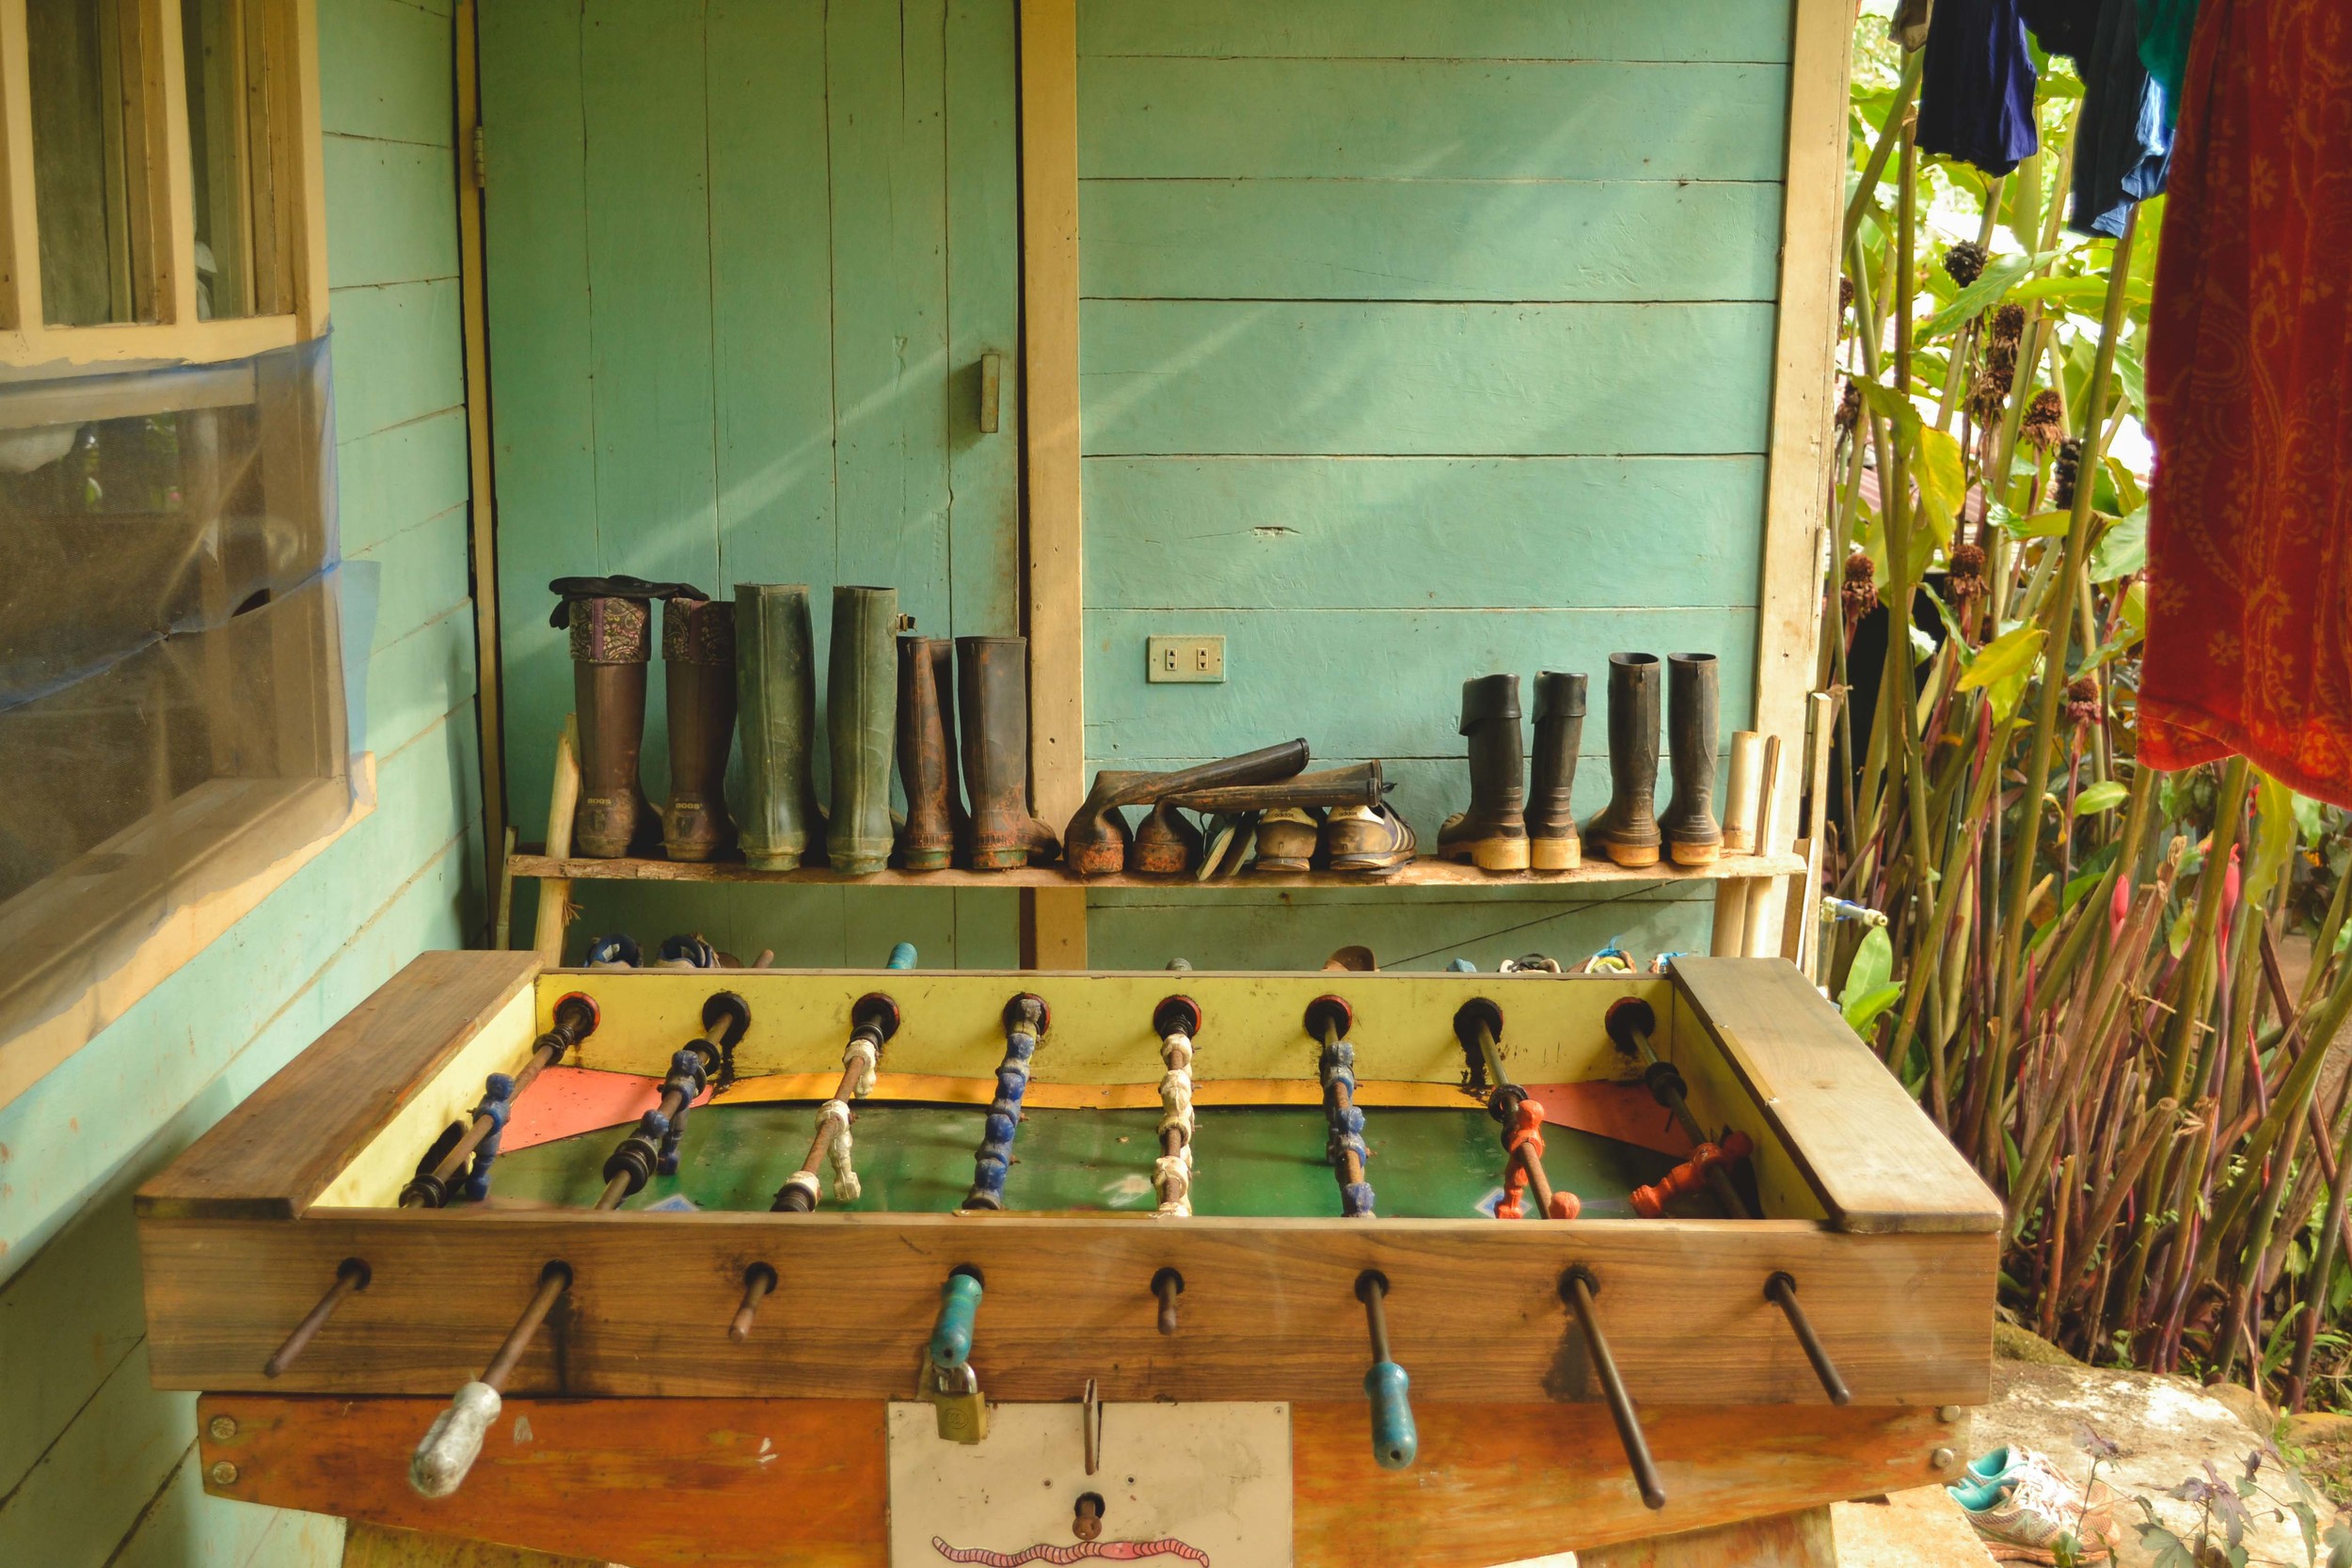  Volunteers' boots arranged near the volunteers' dorm and the foosball table 